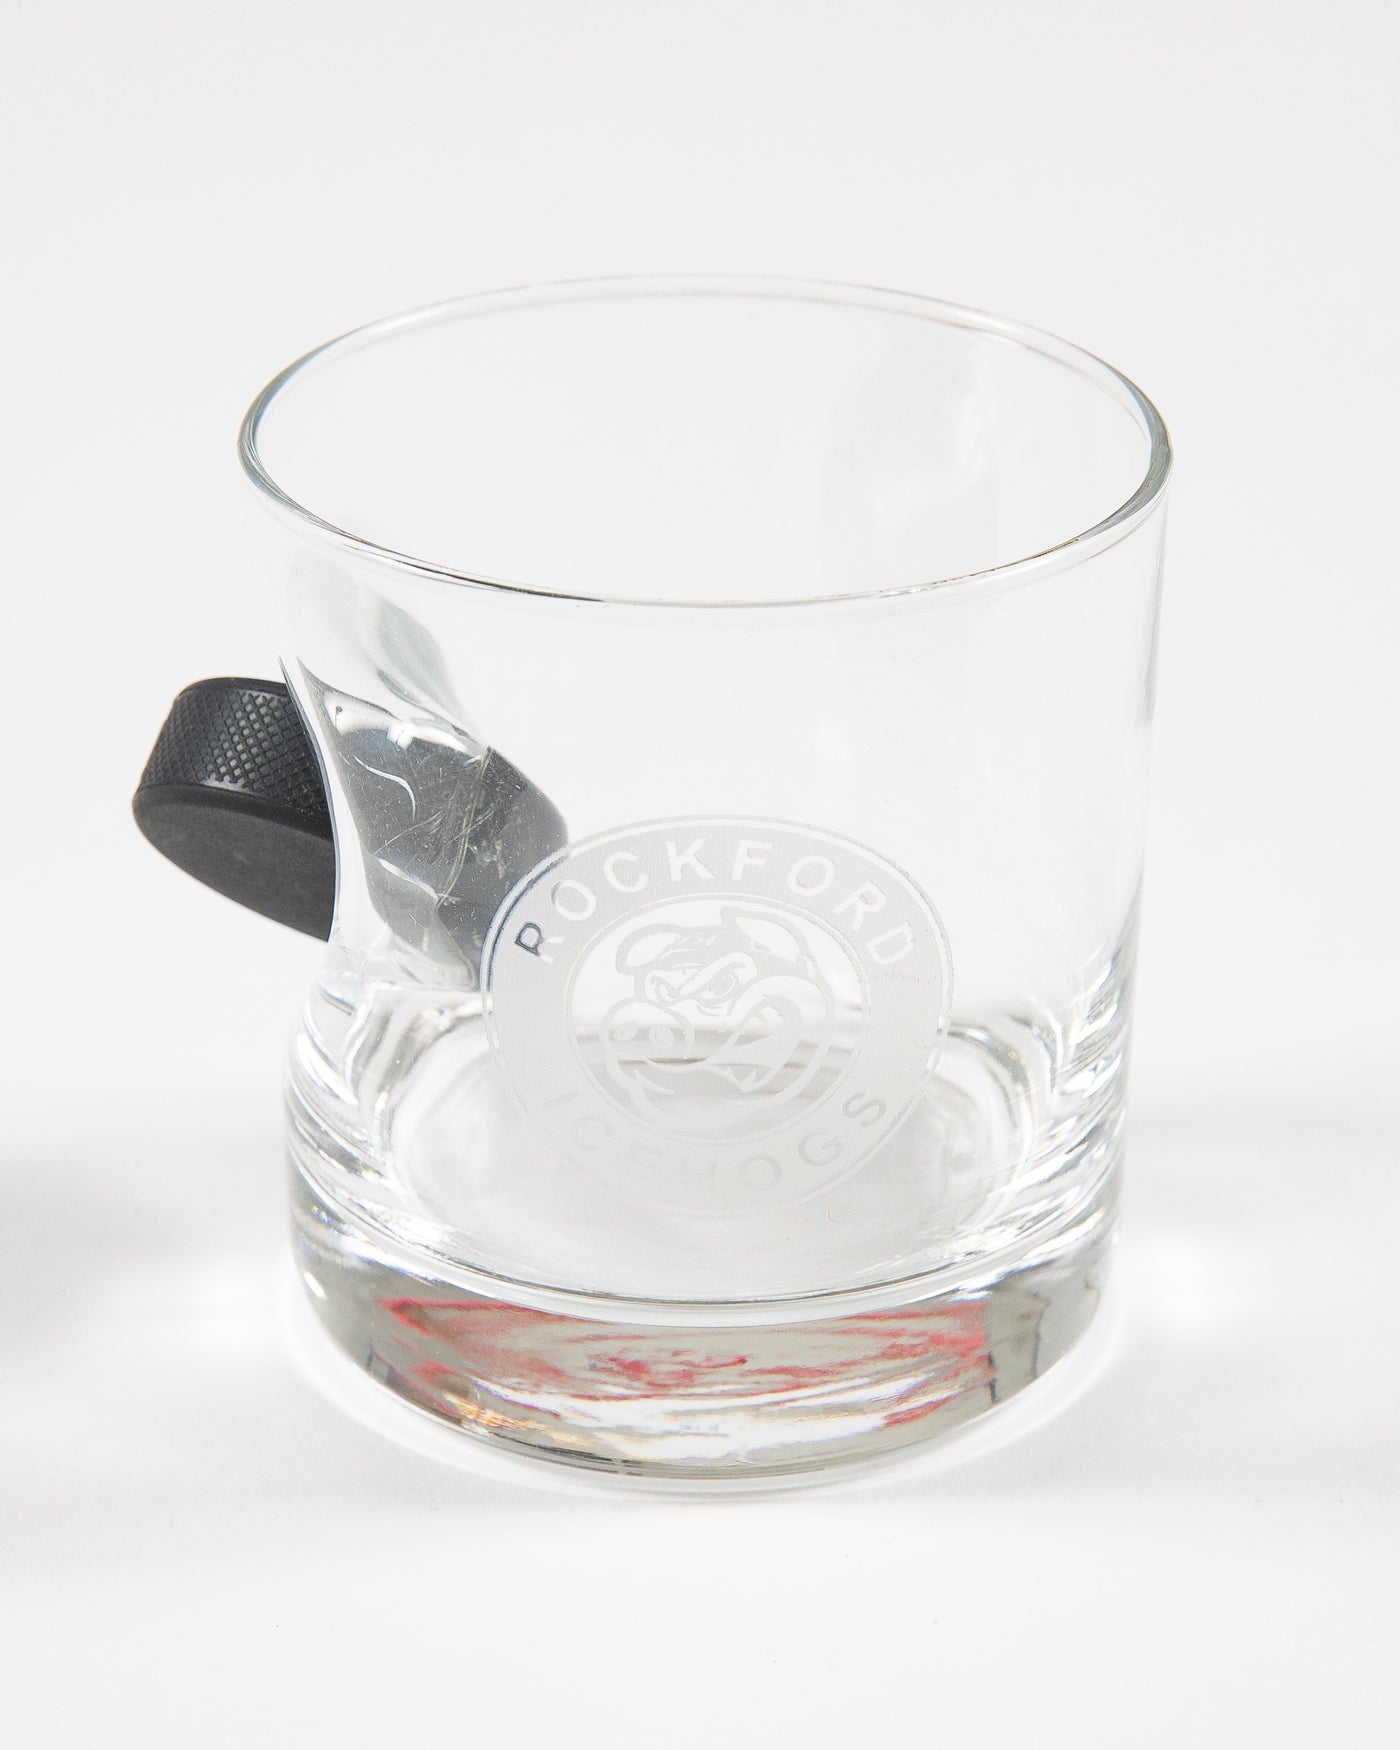 Rockford IceHogs rocks glass with puck going through glass - front lay flat